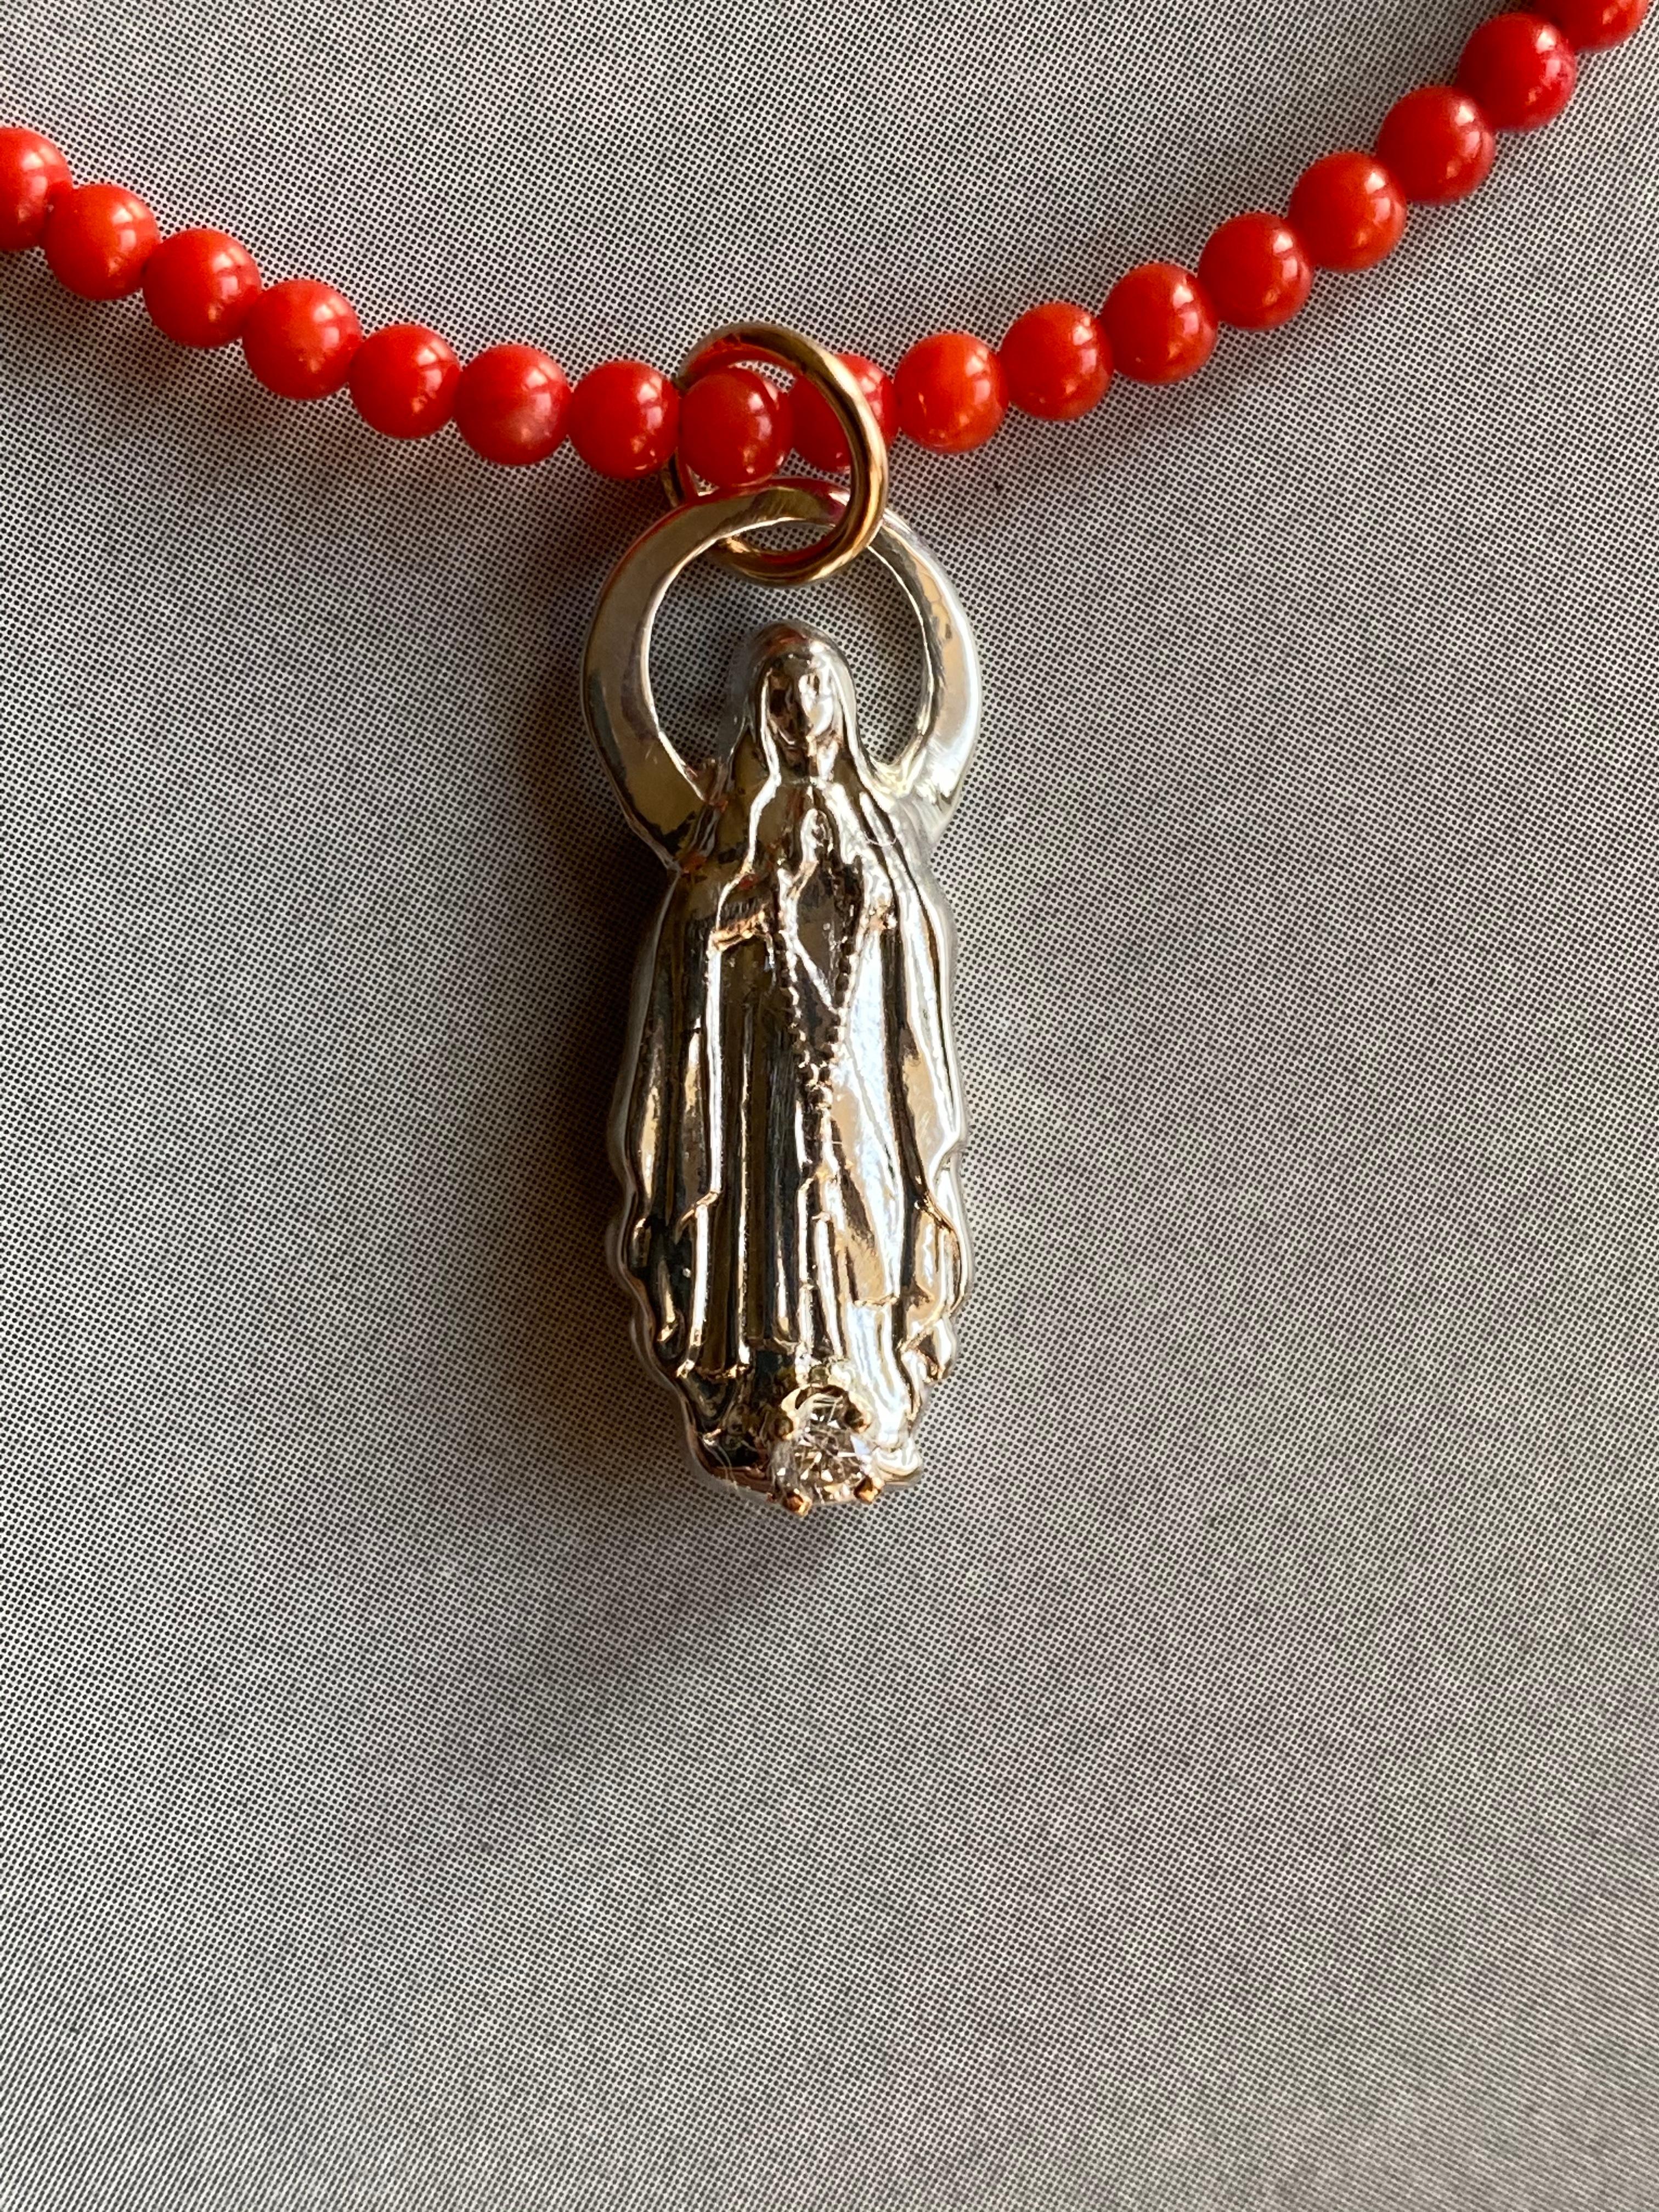 White Diamond Virgin Mary Figurine Coral Bead Choker Necklace J Dauphin

Exclusive piece with Virgin Mary pendant and an White Diamond set in a gold prong on a Silver figurine pendant. Bead Necklace is 16' long but can be made shorter or longer on